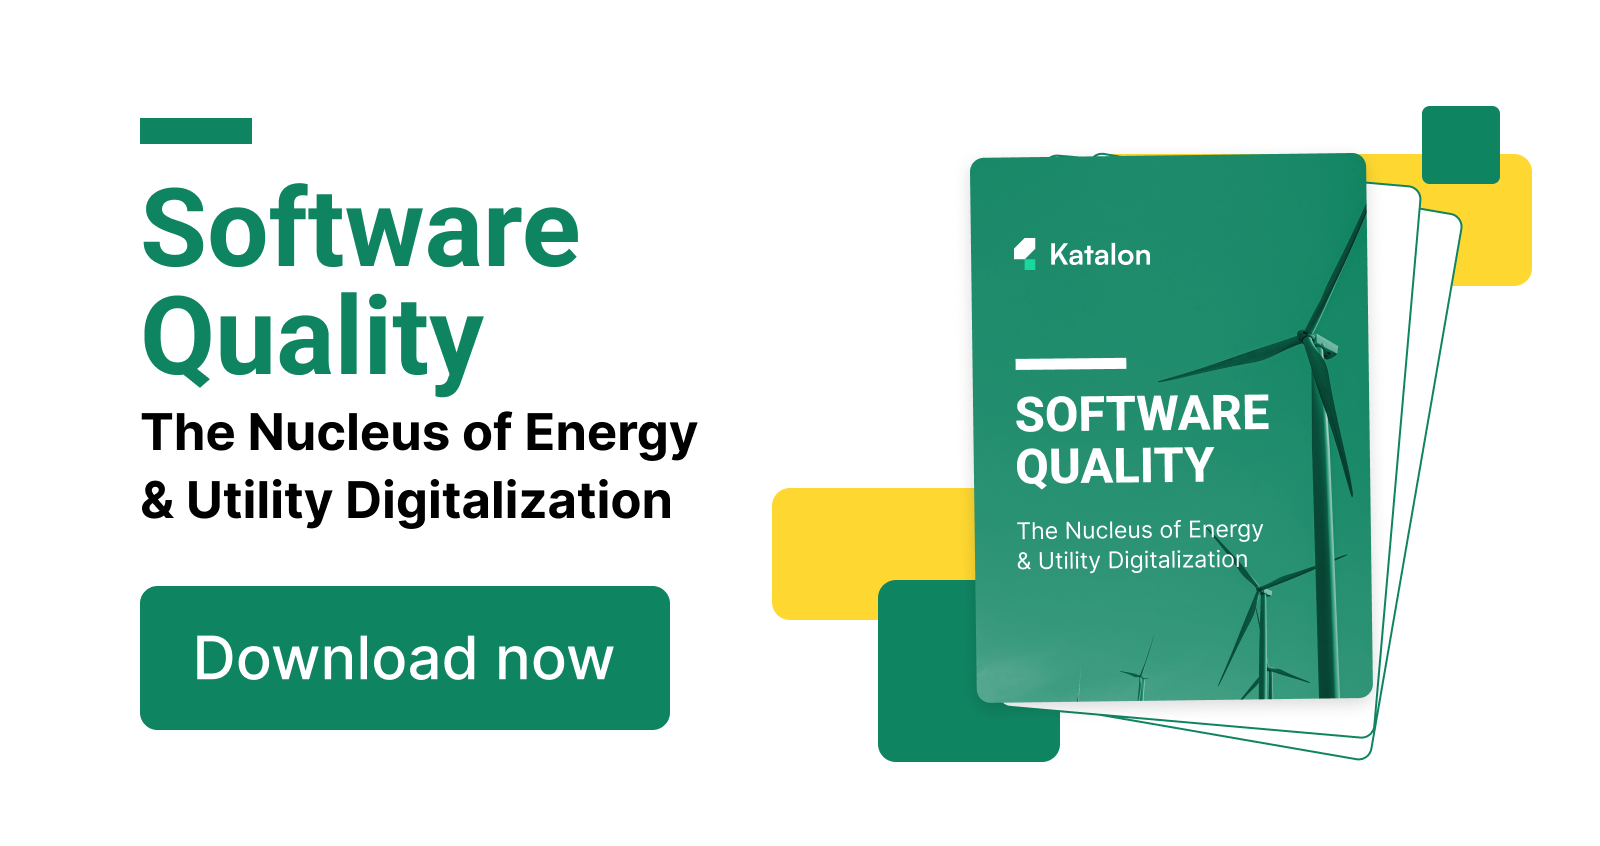 Software quality - the nucleus of energy and utility digitalization